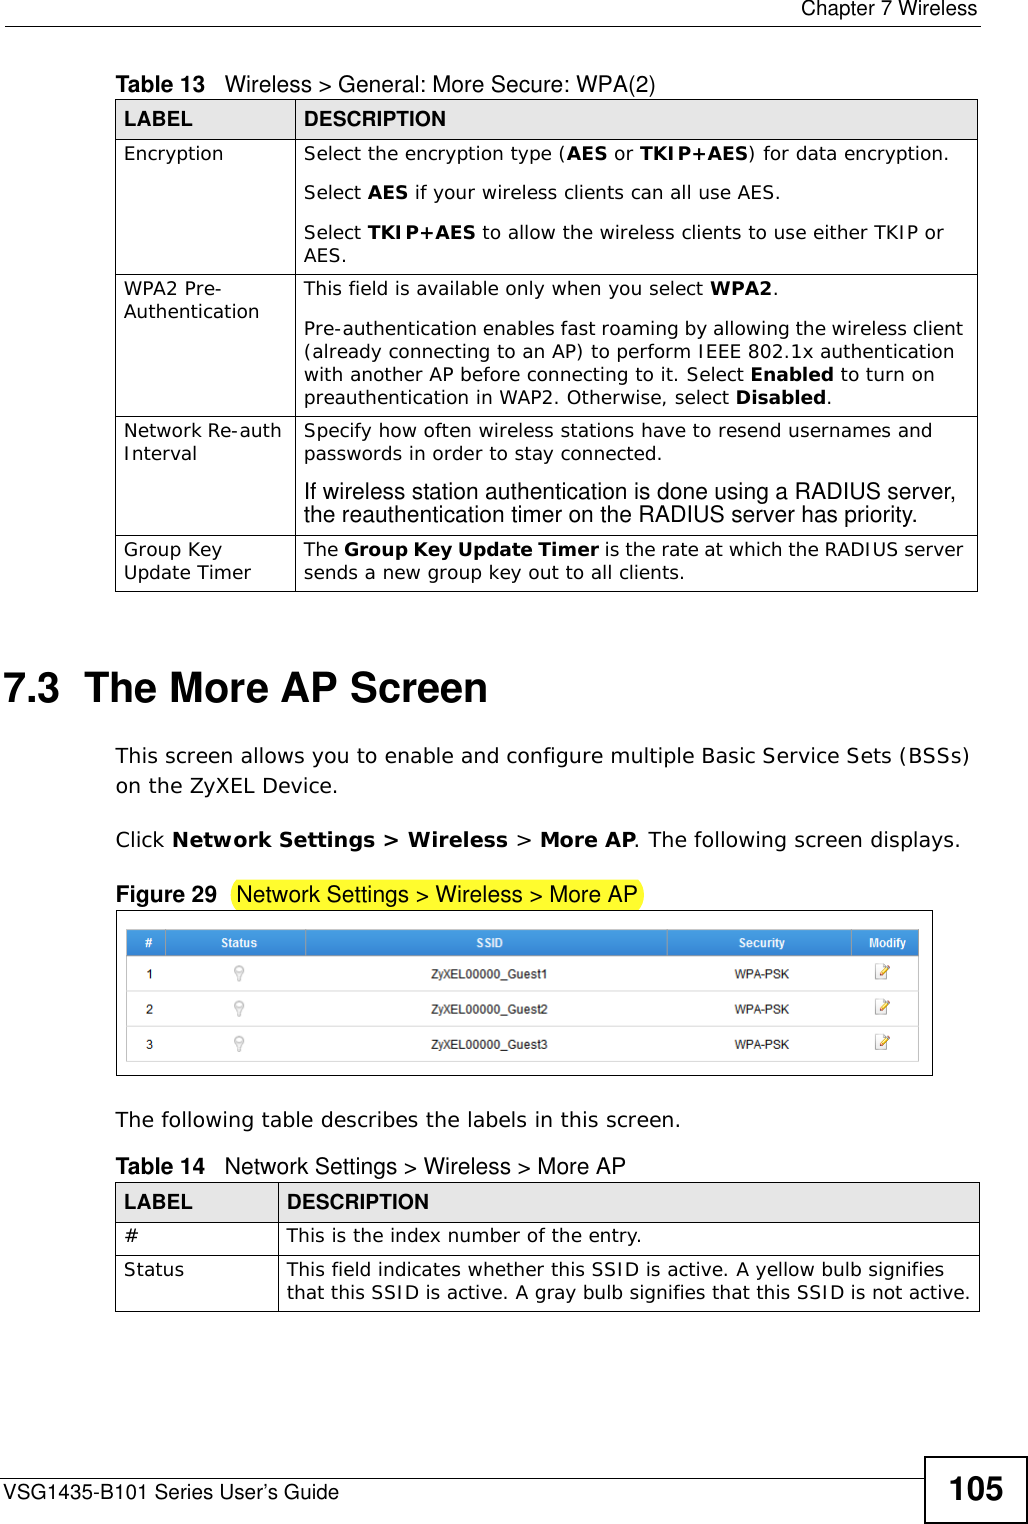  Chapter 7 WirelessVSG1435-B101 Series User’s Guide 1057.3  The More AP ScreenThis screen allows you to enable and configure multiple Basic Service Sets (BSSs) on the ZyXEL Device.Click Network Settings &gt; Wireless &gt; More AP. The following screen displays.Figure 29   Network Settings &gt; Wireless &gt; More APThe following table describes the labels in this screen.Encryption Select the encryption type (AES or TKIP+AES) for data encryption.Select AES if your wireless clients can all use AES.Select TKIP+AES to allow the wireless clients to use either TKIP or AES.WPA2 Pre-Authentication This field is available only when you select WPA2.Pre-authentication enables fast roaming by allowing the wireless client (already connecting to an AP) to perform IEEE 802.1x authentication with another AP before connecting to it. Select Enabled to turn on preauthentication in WAP2. Otherwise, select Disabled.Network Re-auth Interval Specify how often wireless stations have to resend usernames and passwords in order to stay connected.If wireless station authentication is done using a RADIUS server, the reauthentication timer on the RADIUS server has priority.Group Key Update Timer The Group Key Update Timer is the rate at which the RADIUS server sends a new group key out to all clients. Table 13   Wireless &gt; General: More Secure: WPA(2)LABEL DESCRIPTIONTable 14   Network Settings &gt; Wireless &gt; More APLABEL DESCRIPTION# This is the index number of the entry. Status This field indicates whether this SSID is active. A yellow bulb signifies that this SSID is active. A gray bulb signifies that this SSID is not active.